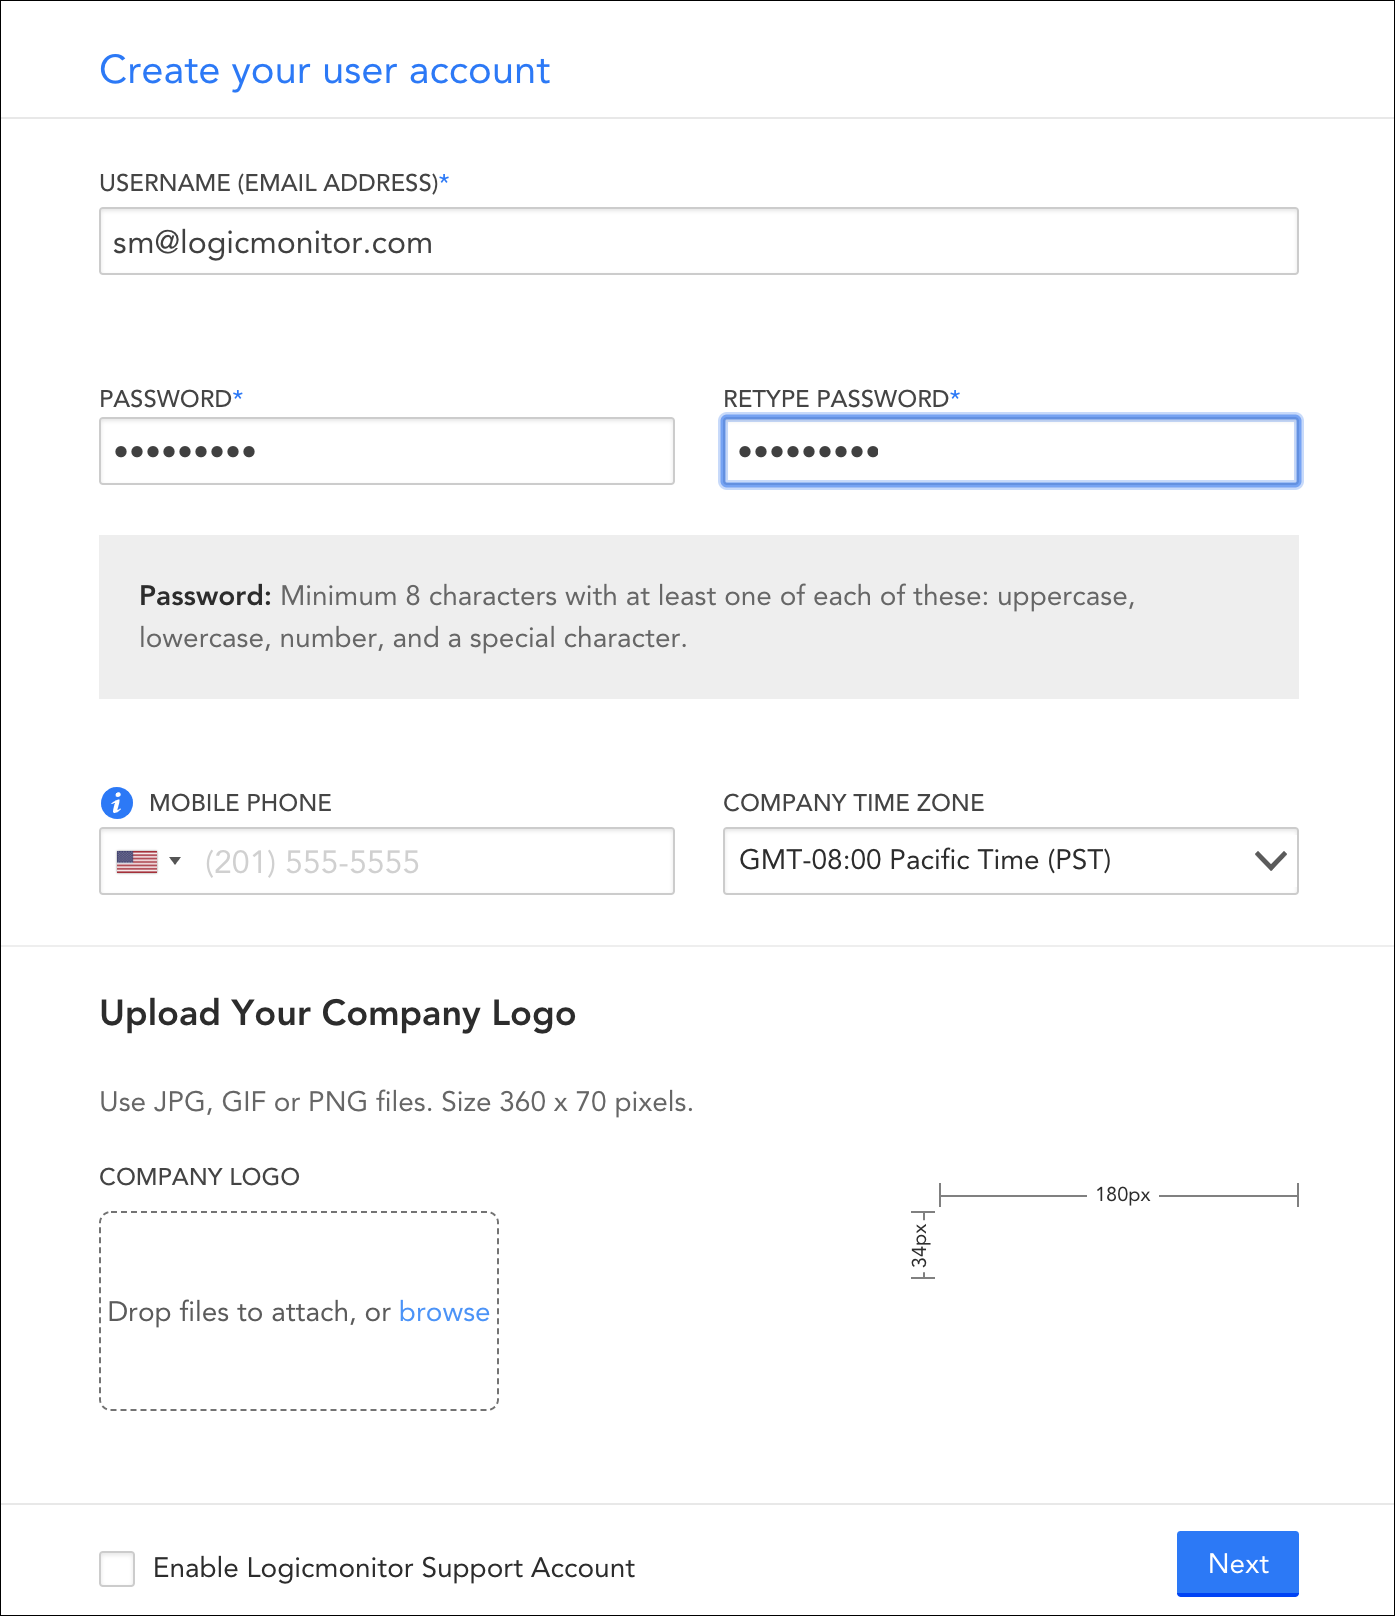 Create your user account dialog